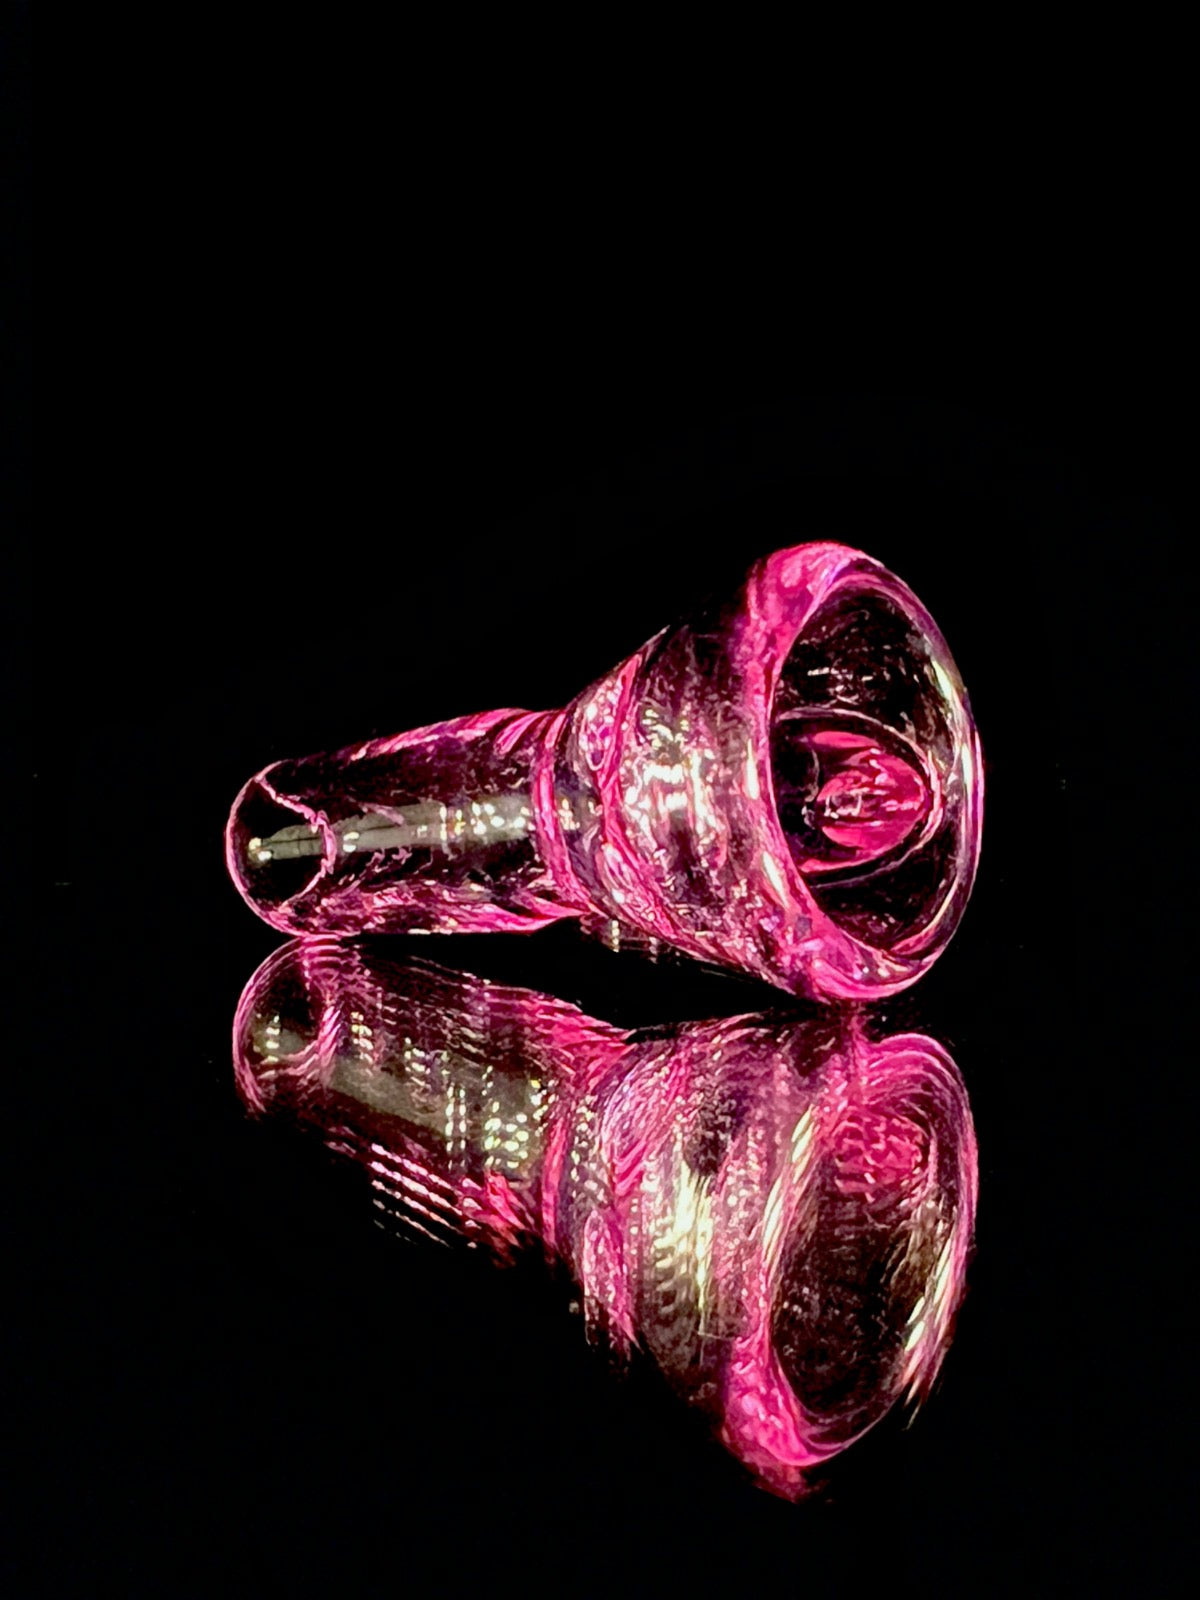 14mm fully-worked Voodoo (CFL) slide by Welch Glass